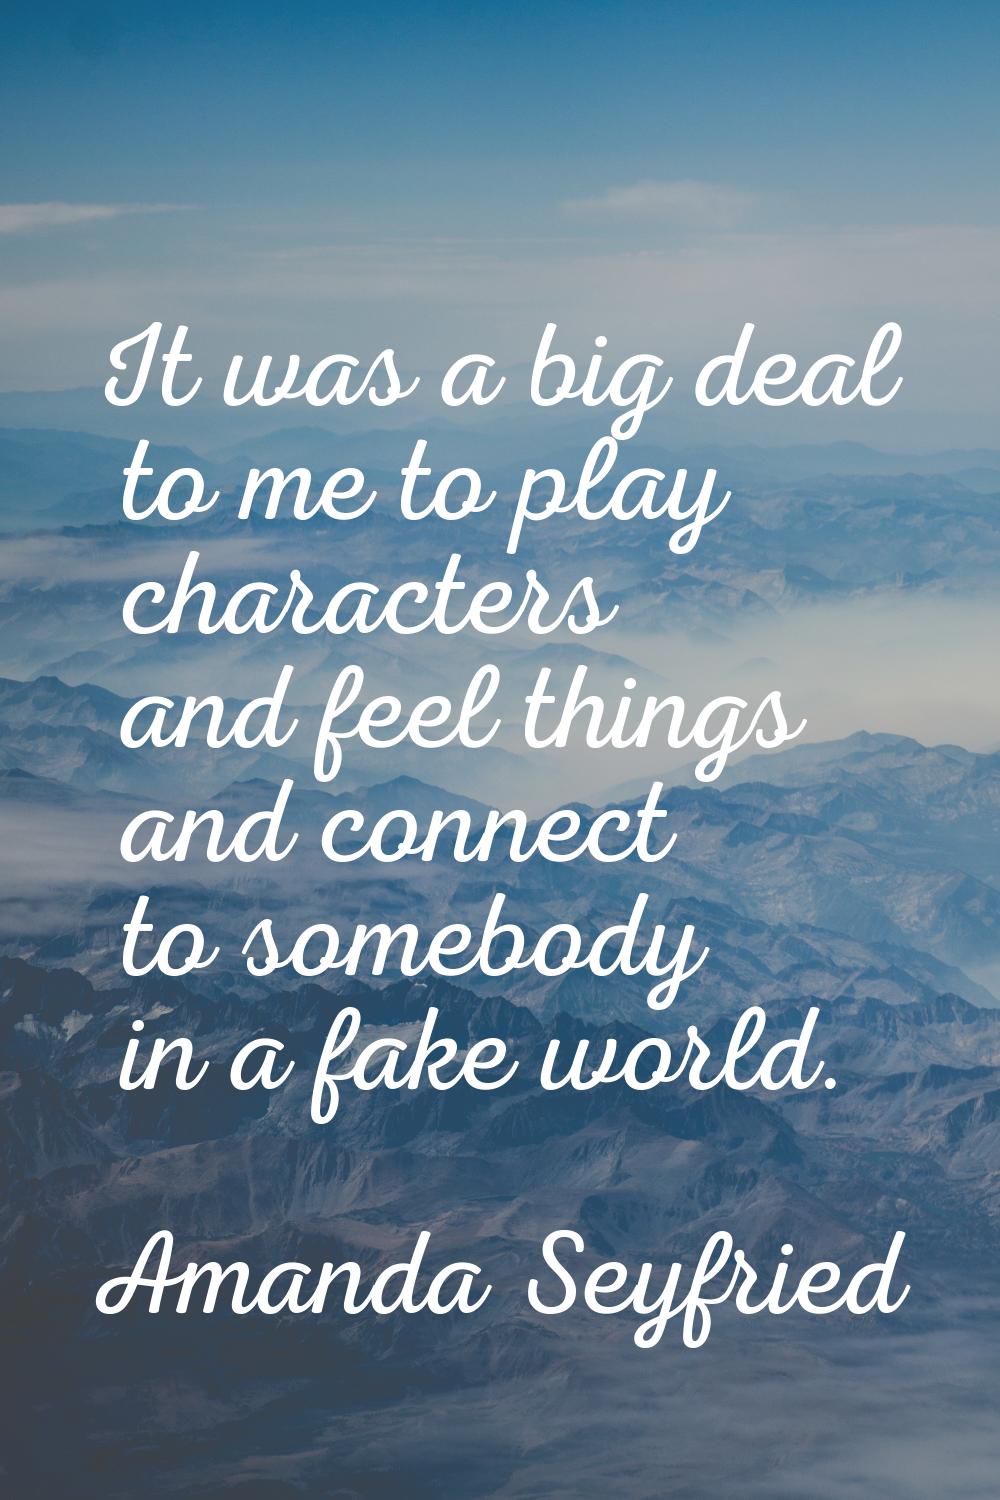 It was a big deal to me to play characters and feel things and connect to somebody in a fake world.